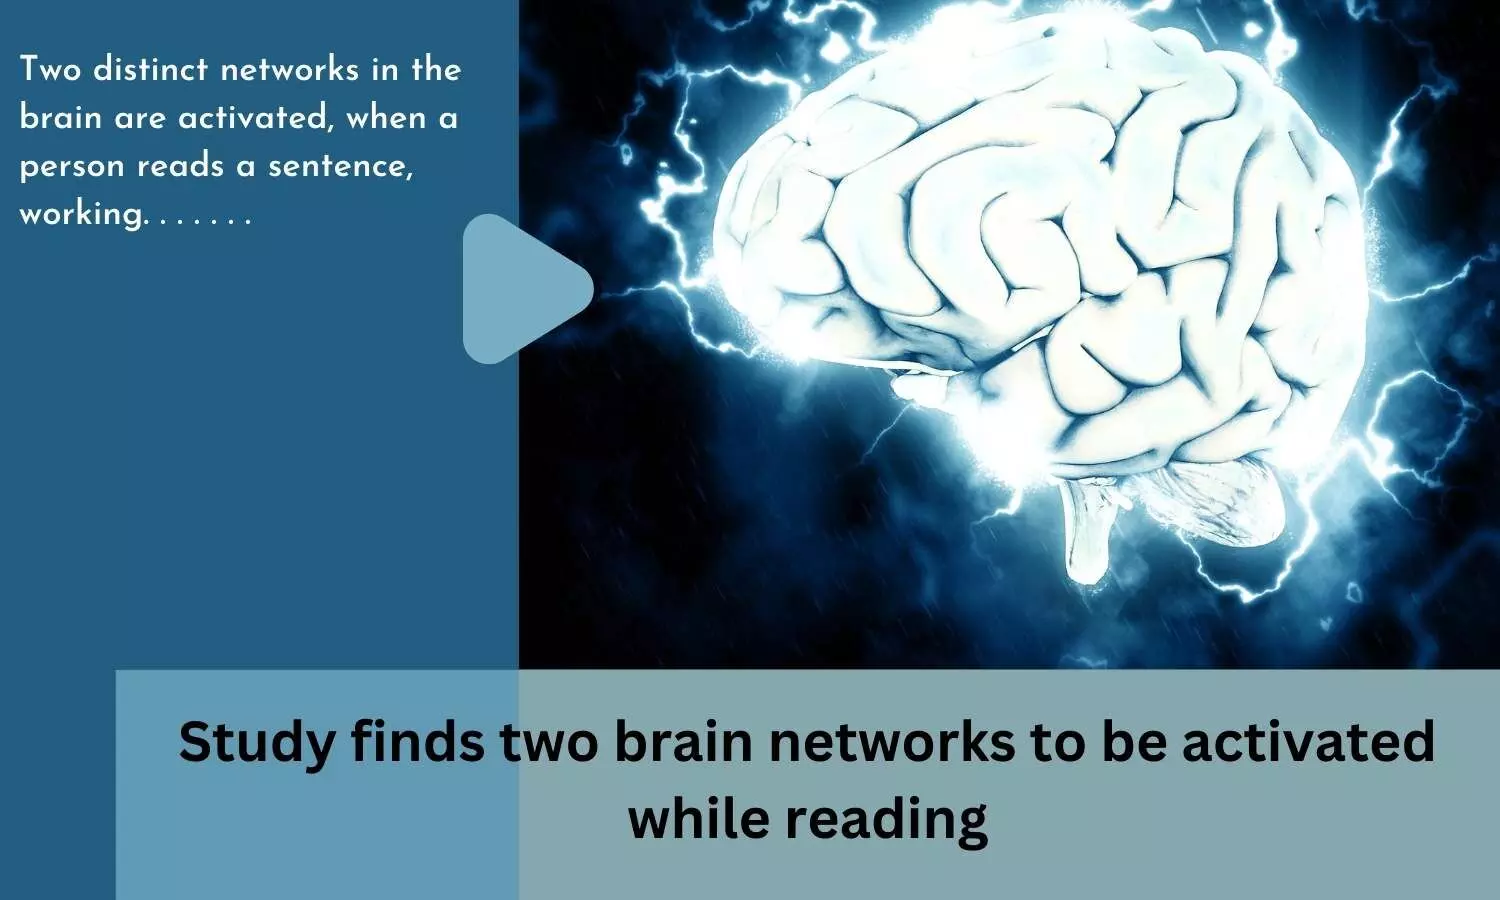 Study finds two brain networks to be activated while reading